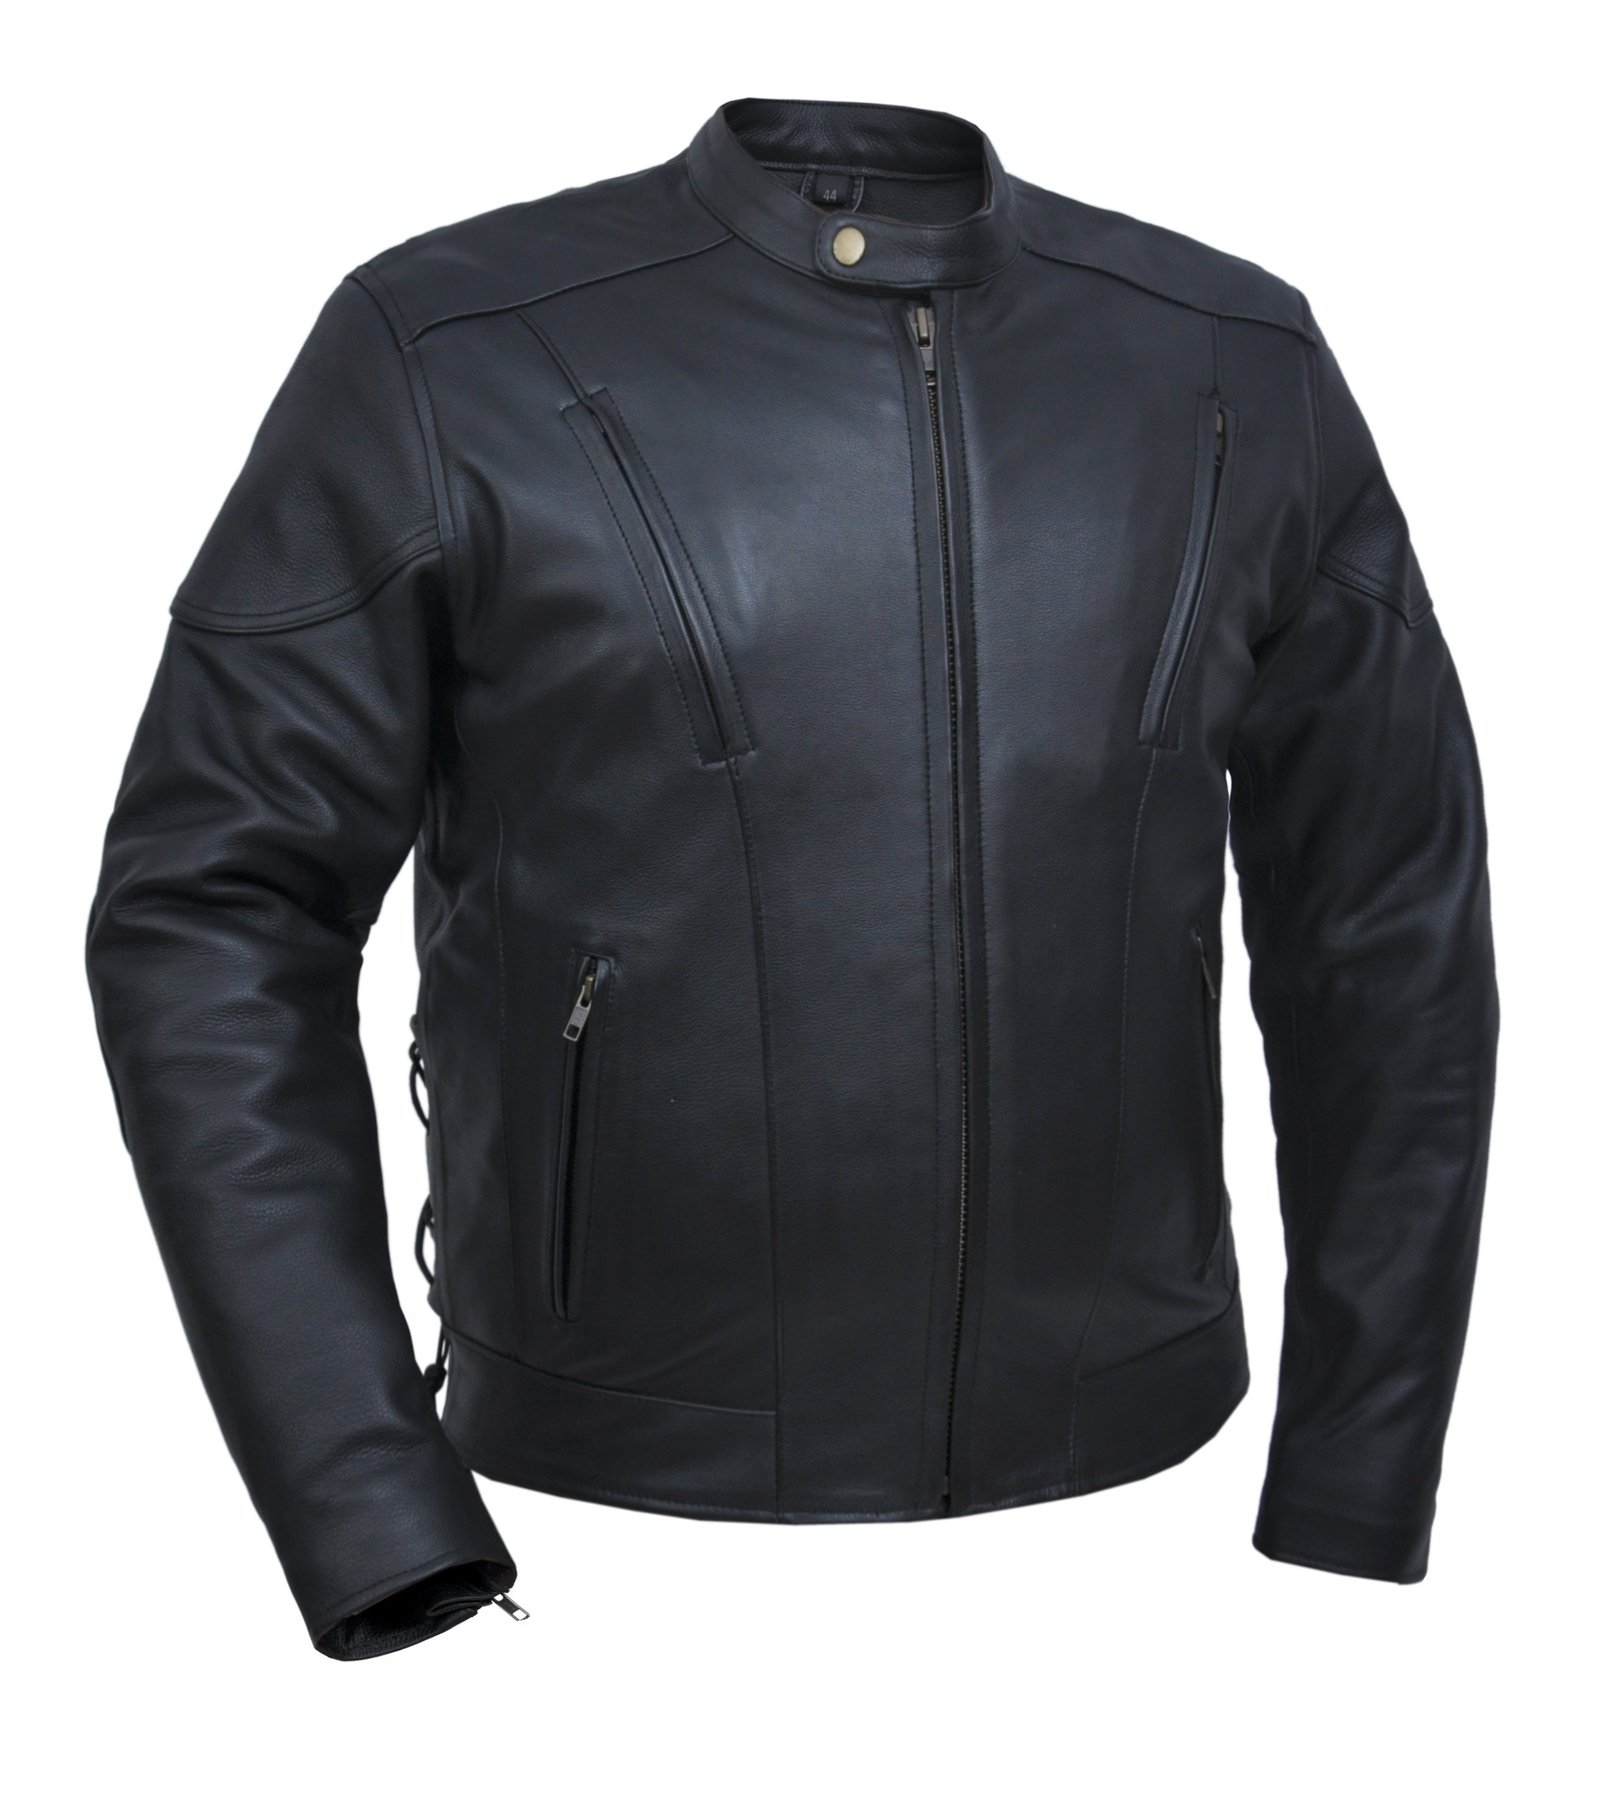 Ultra Leather Vented Euro Jacket - Men's - Motorcycle Riding - 0305-00-UN